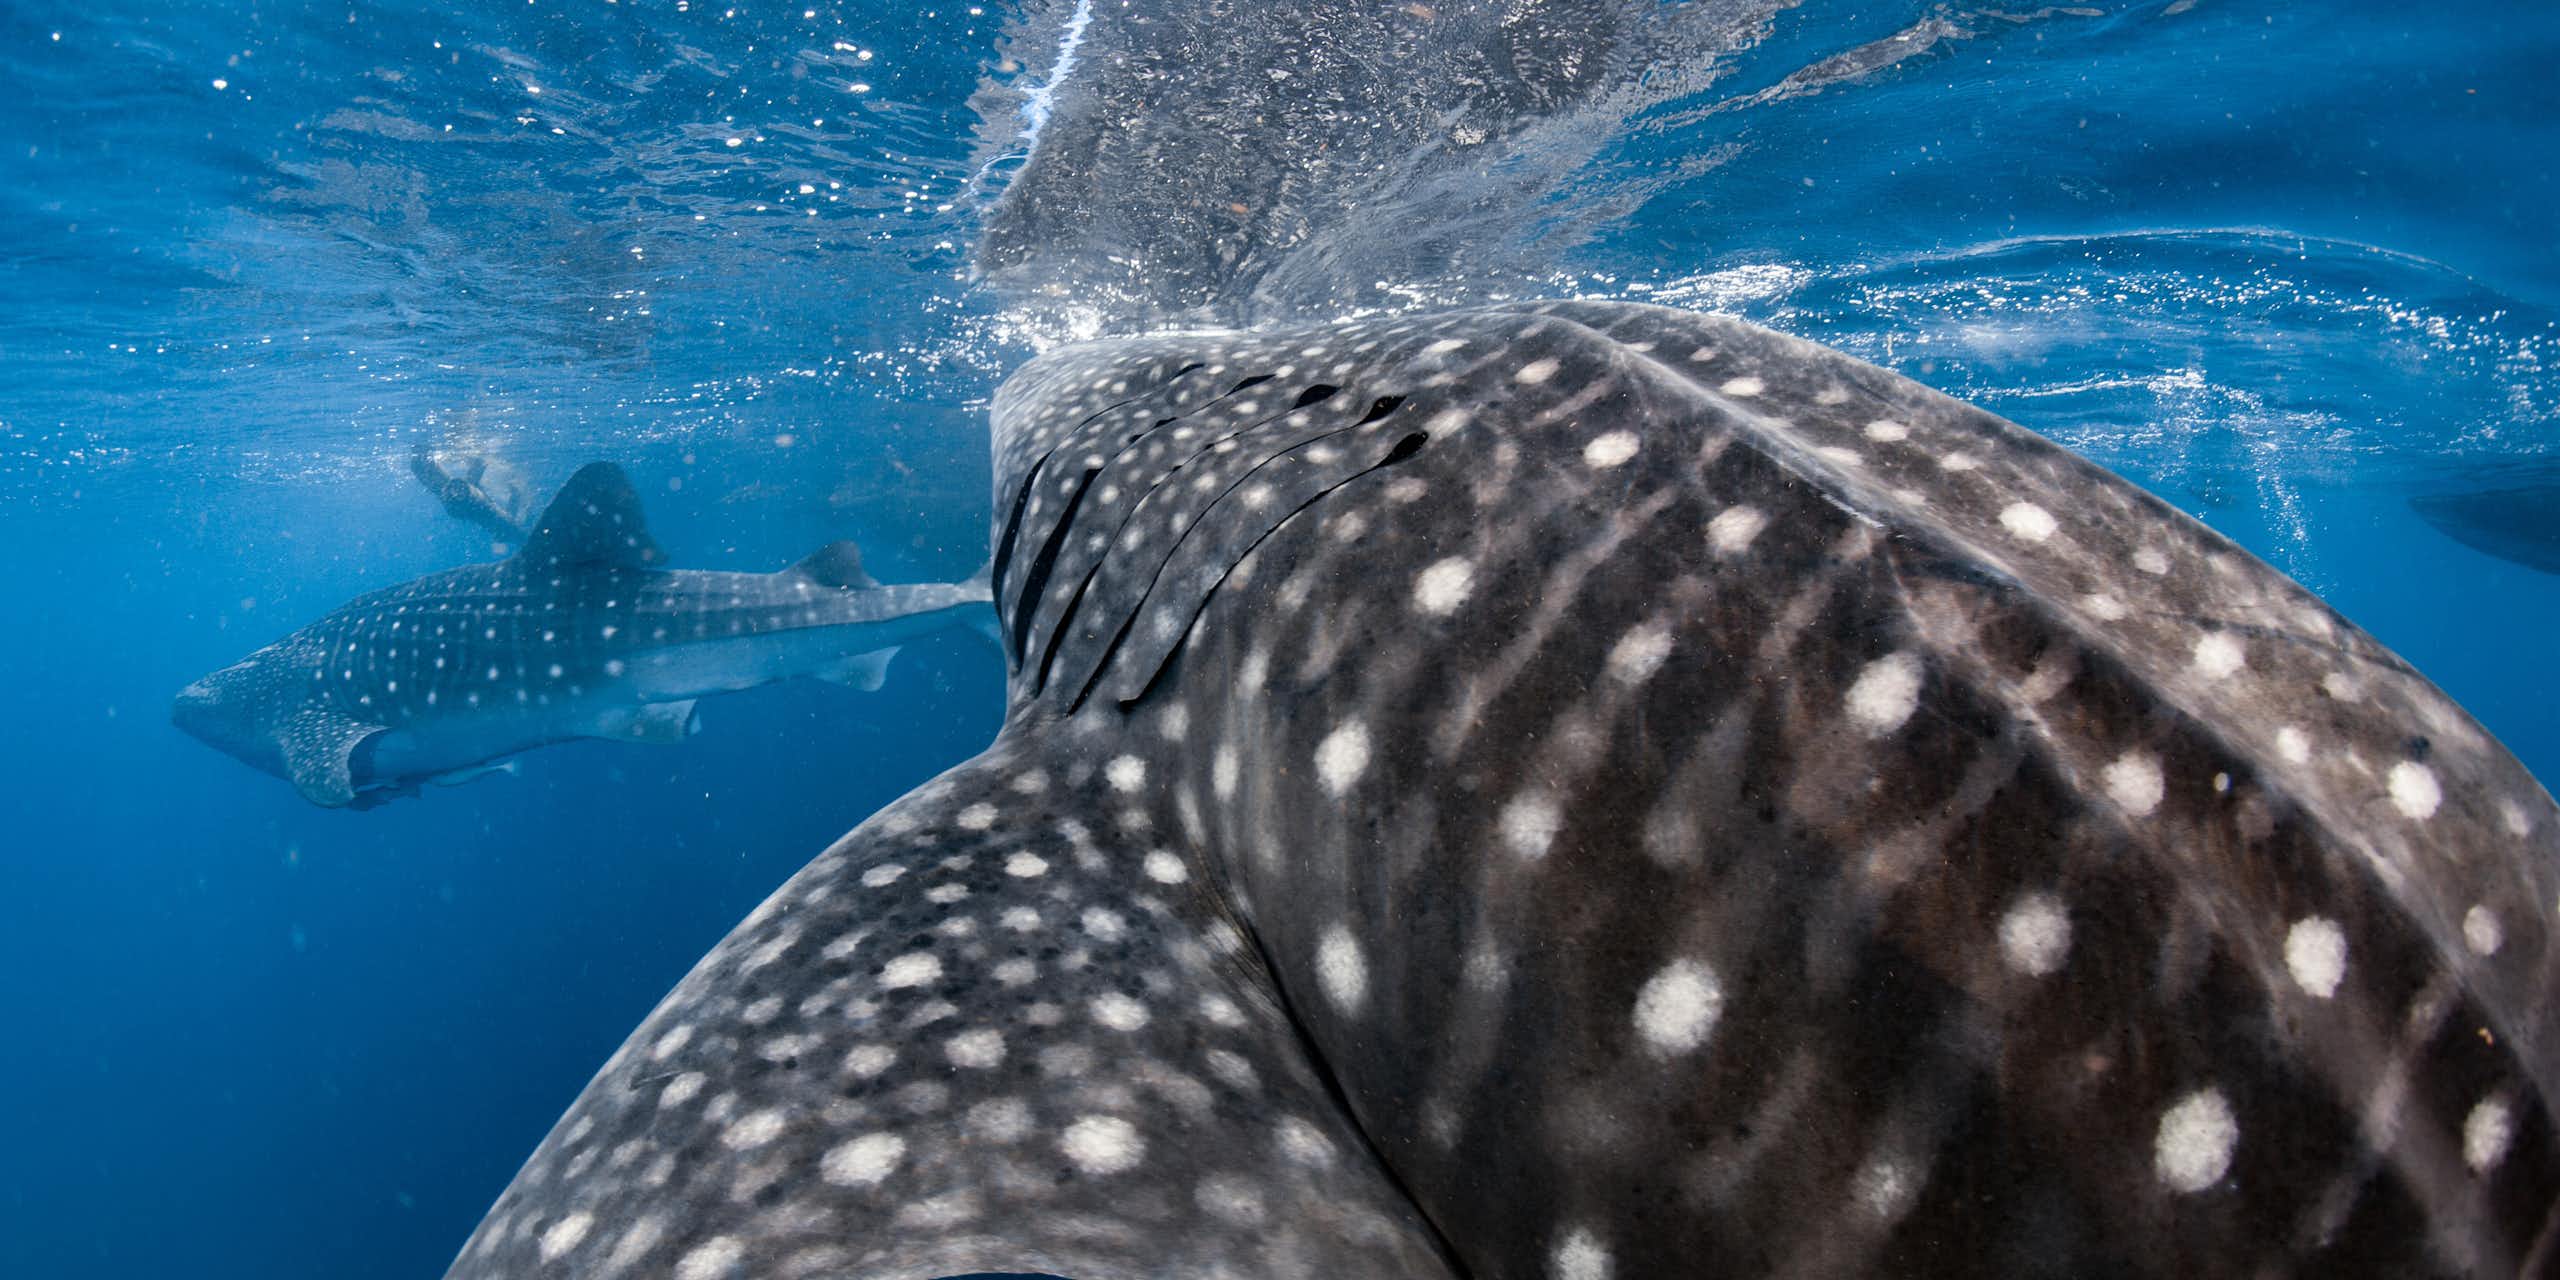 close up of big black whale shark with white spots, another whale shark in background, blue sea